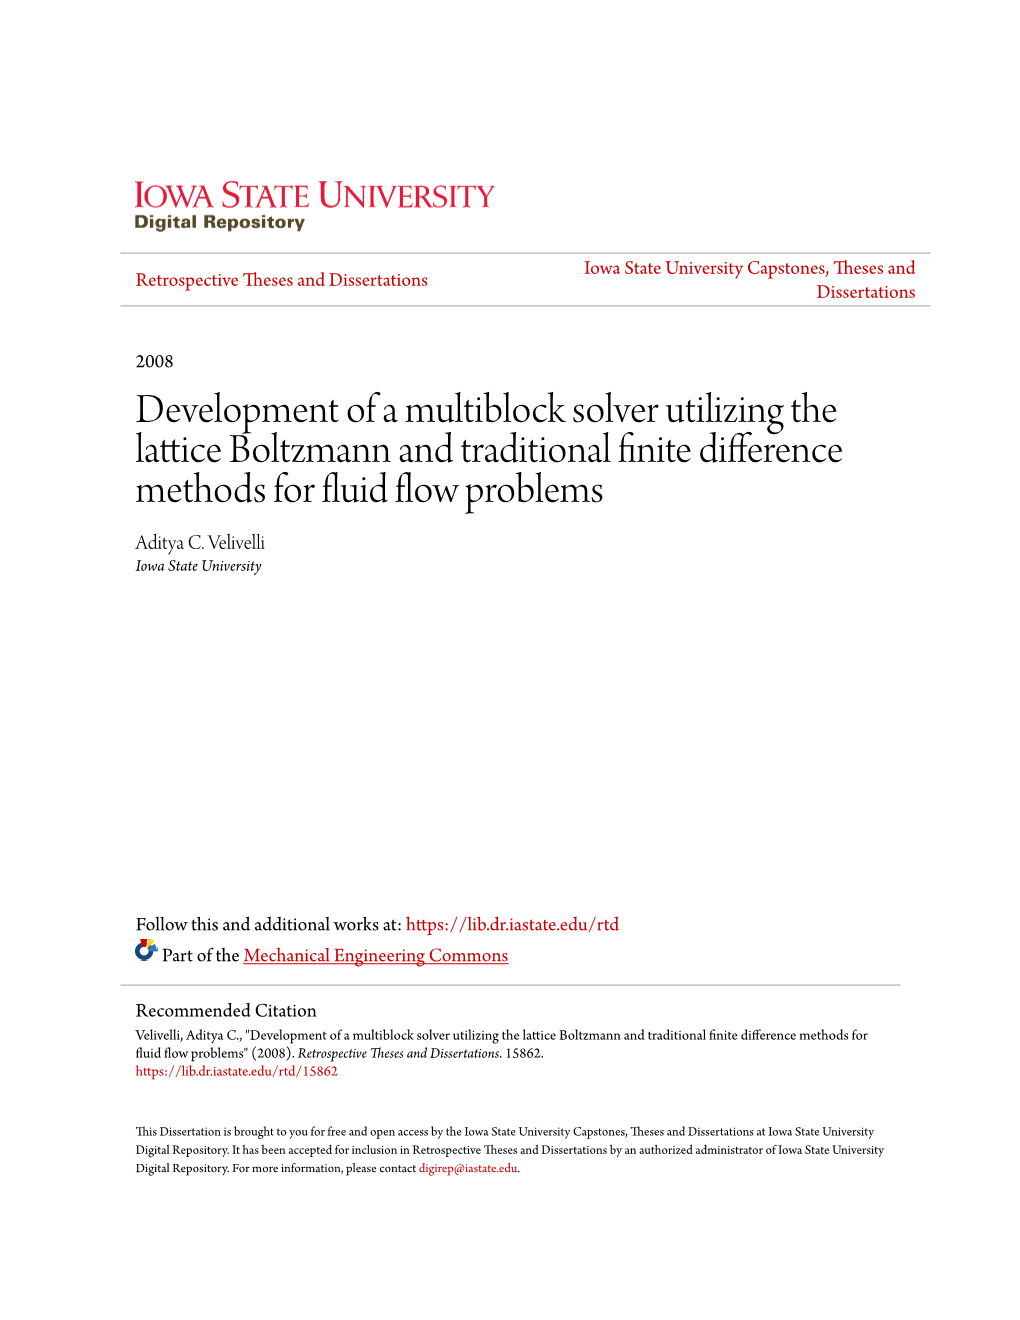 Development of a Multiblock Solver Utilizing the Lattice Boltzmann and Traditional Finite Difference Methods for Fluid Flow Problems Aditya C